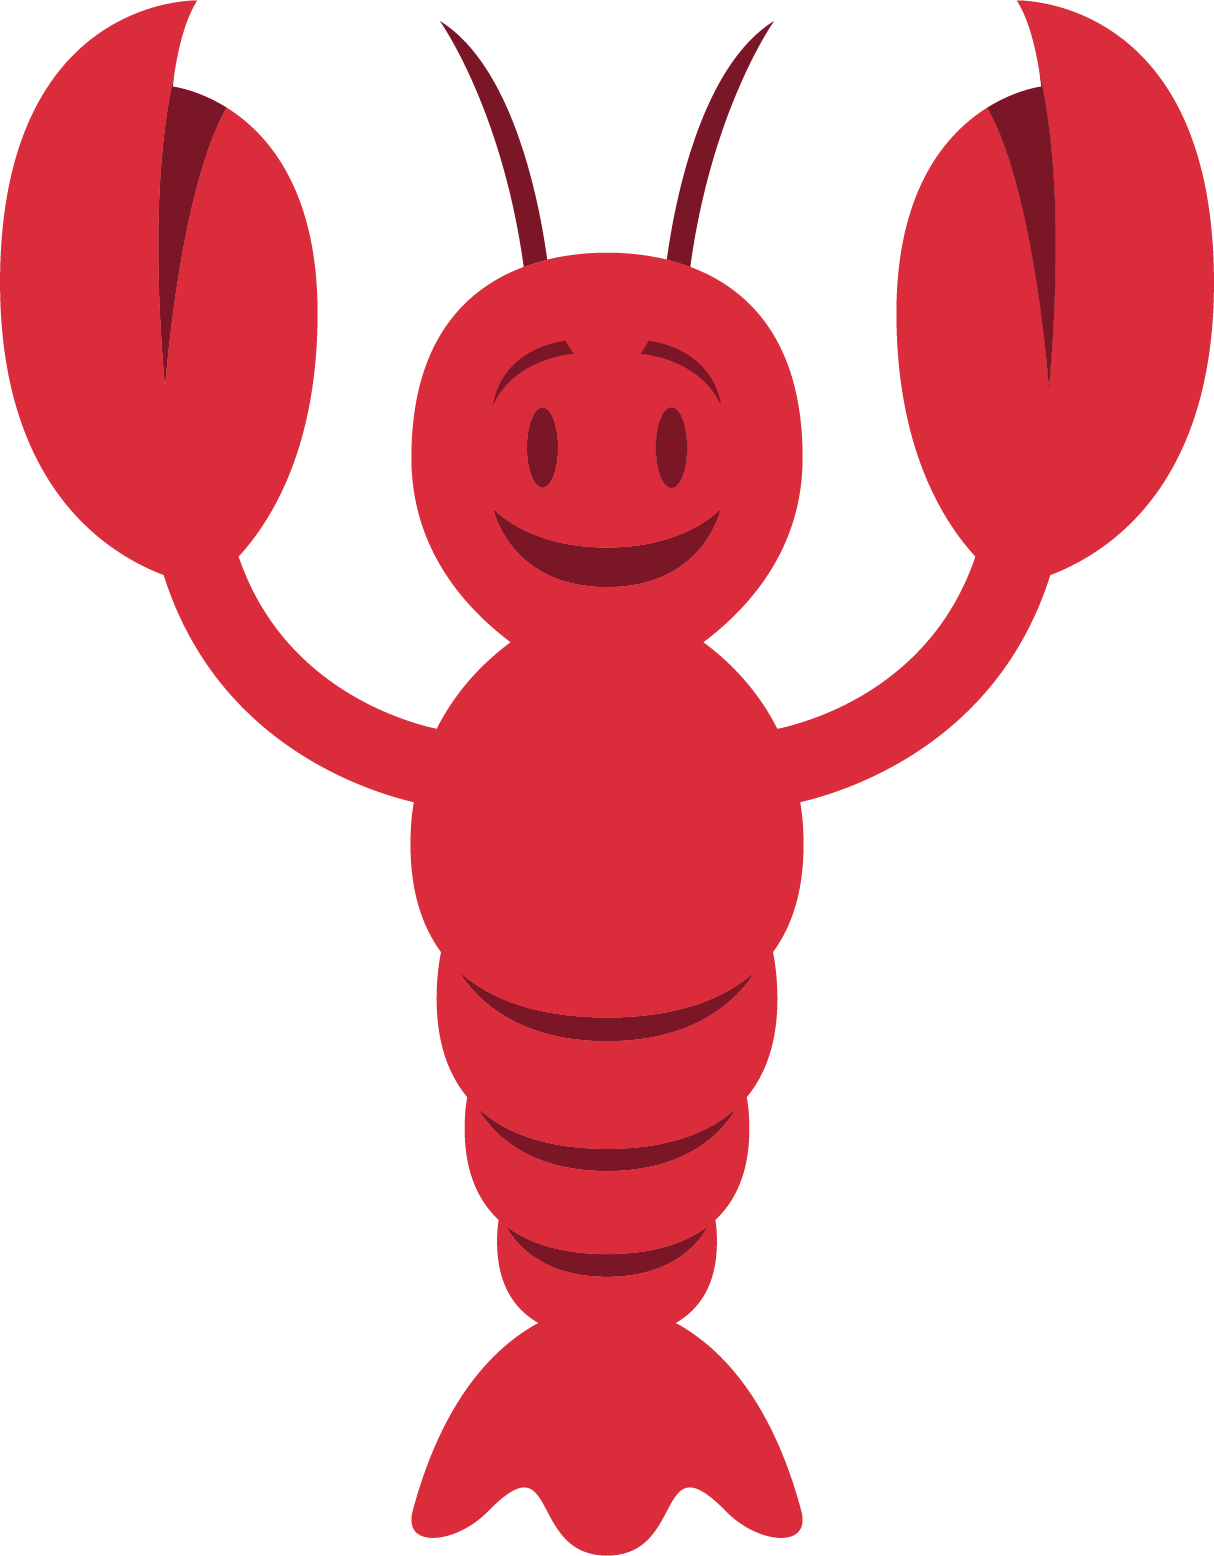 An animated red crawfish with a smile on its face.